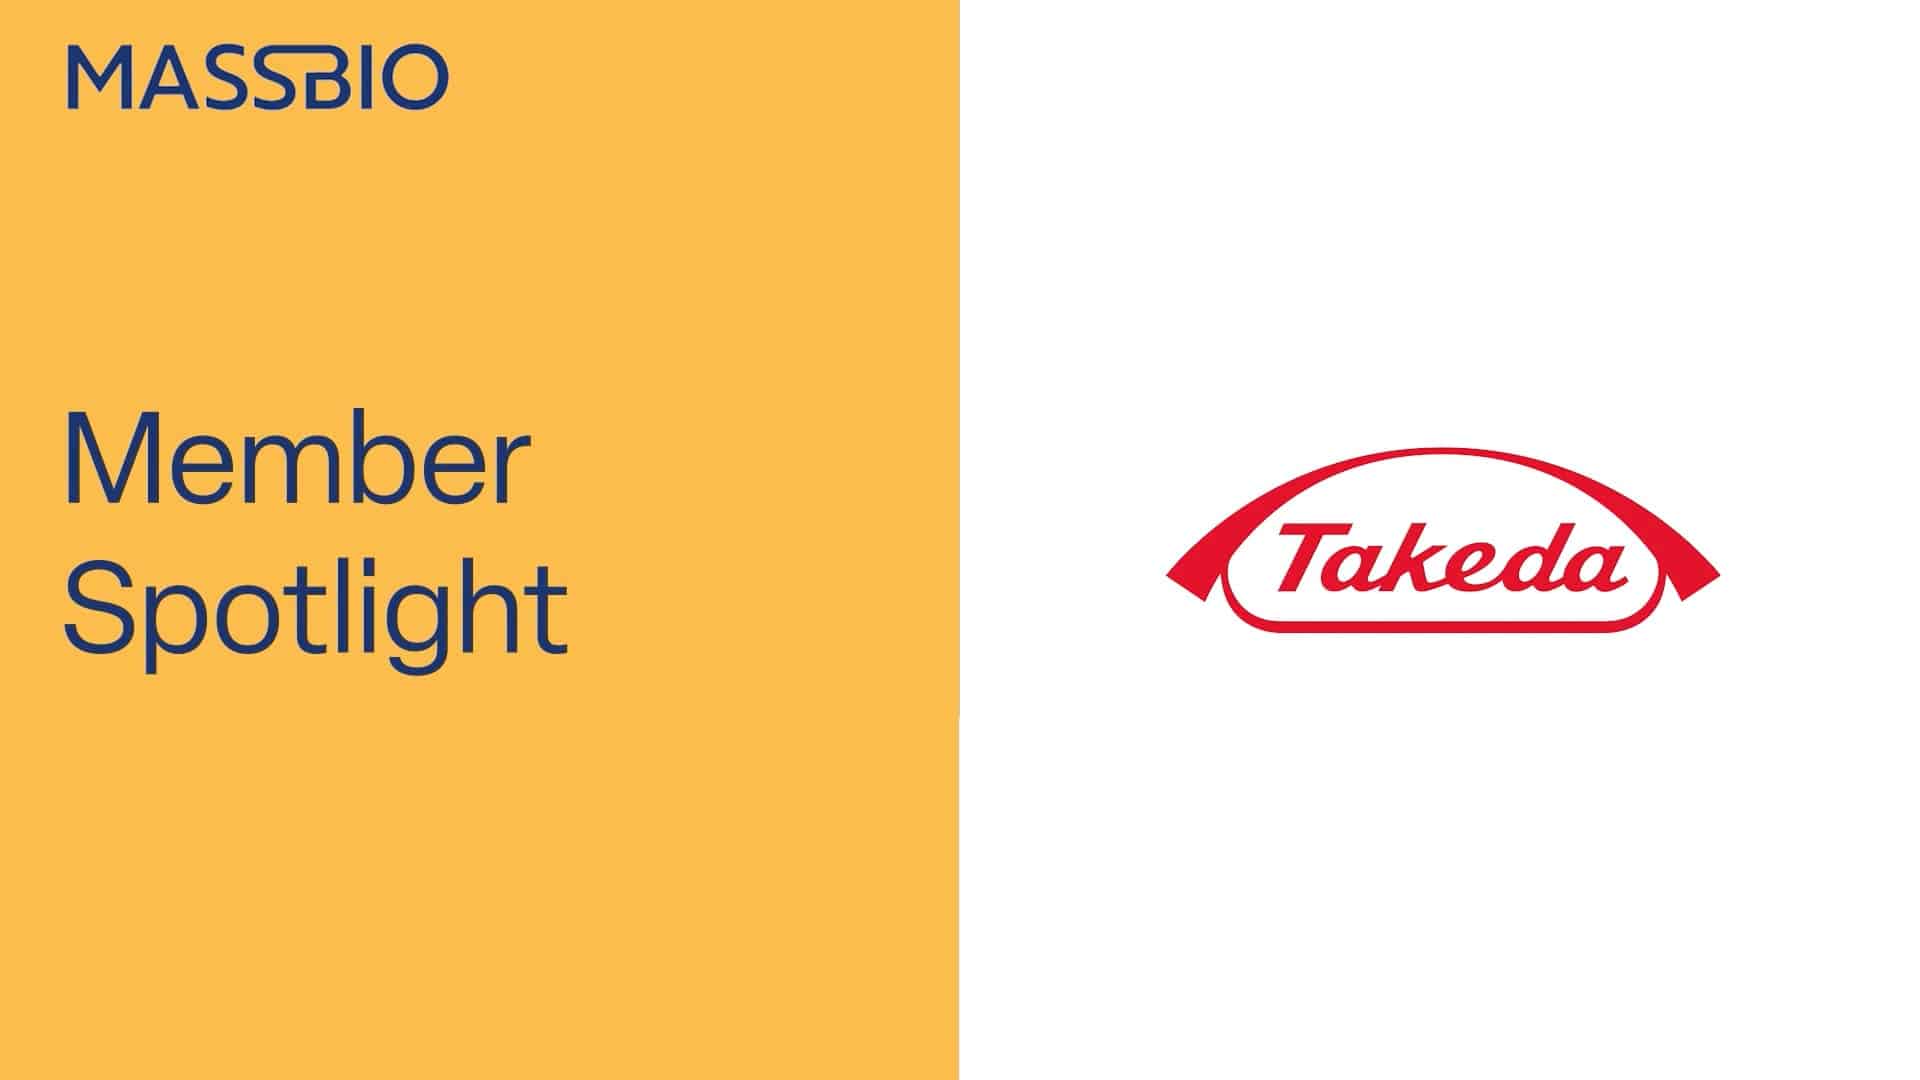 A yellow and white graphic with the words "Member Spotlight" on the left and the red logo of Takeda on the right.